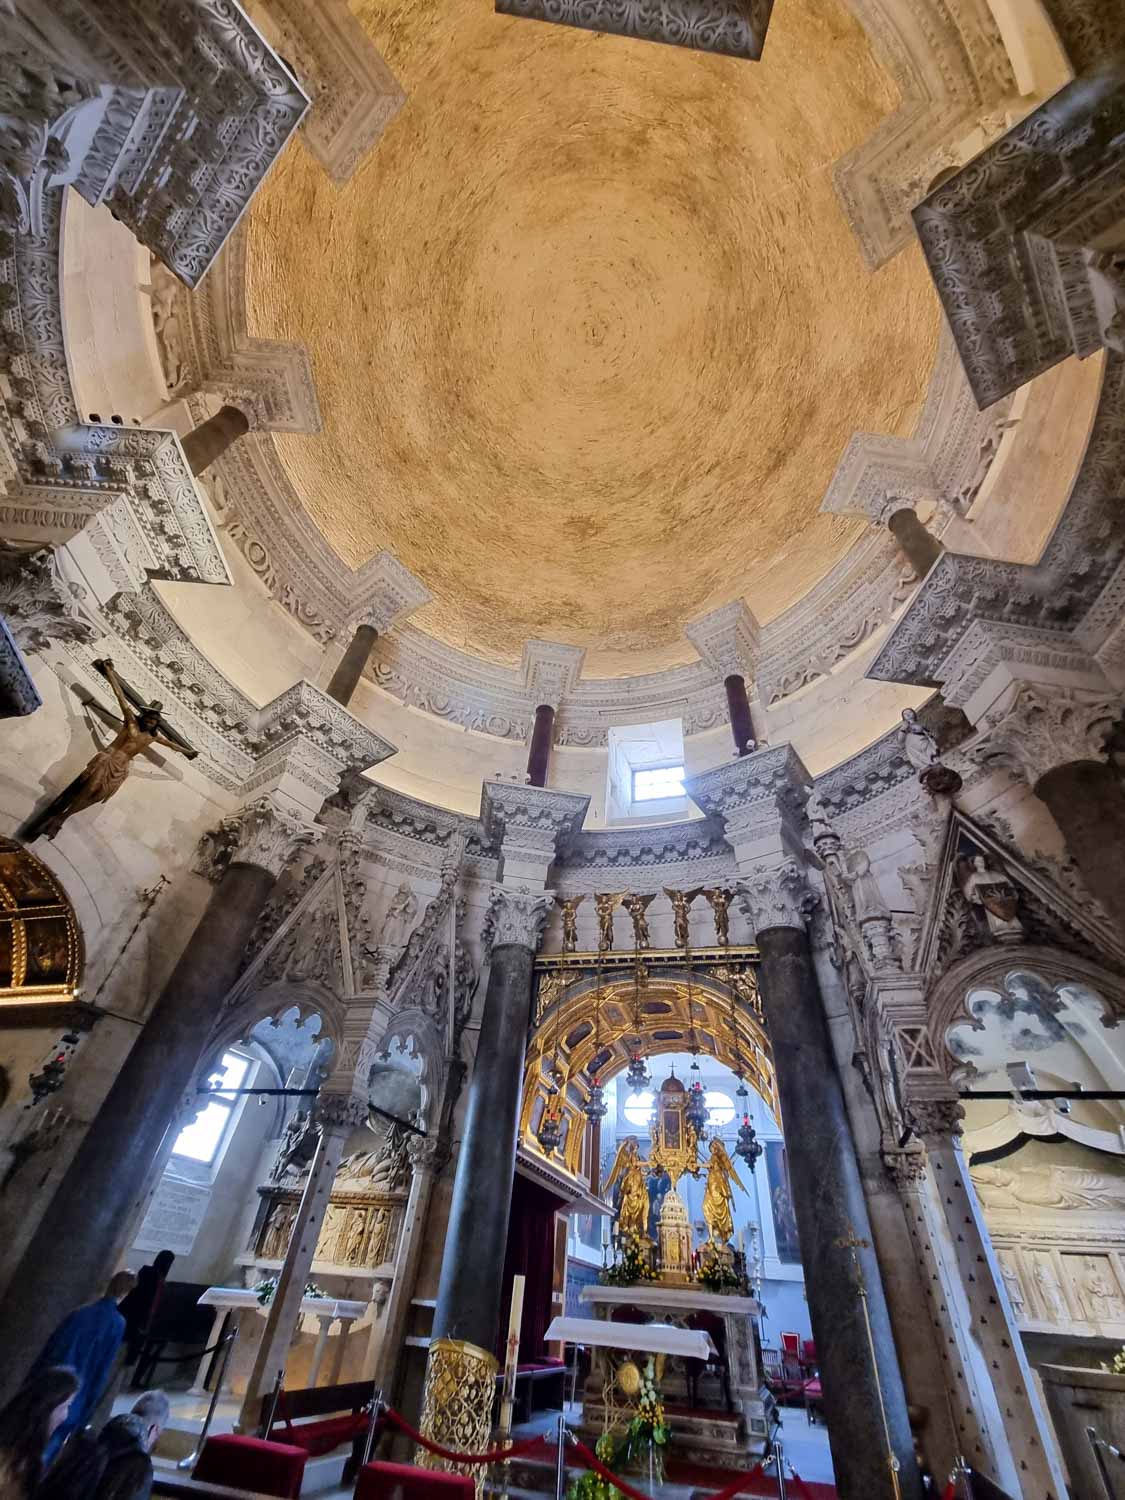 View of the romed roof of the cathedral of St Domnius, formerly Diocletian's Mausoleum - a visit is one of the best things to do in Split with kids